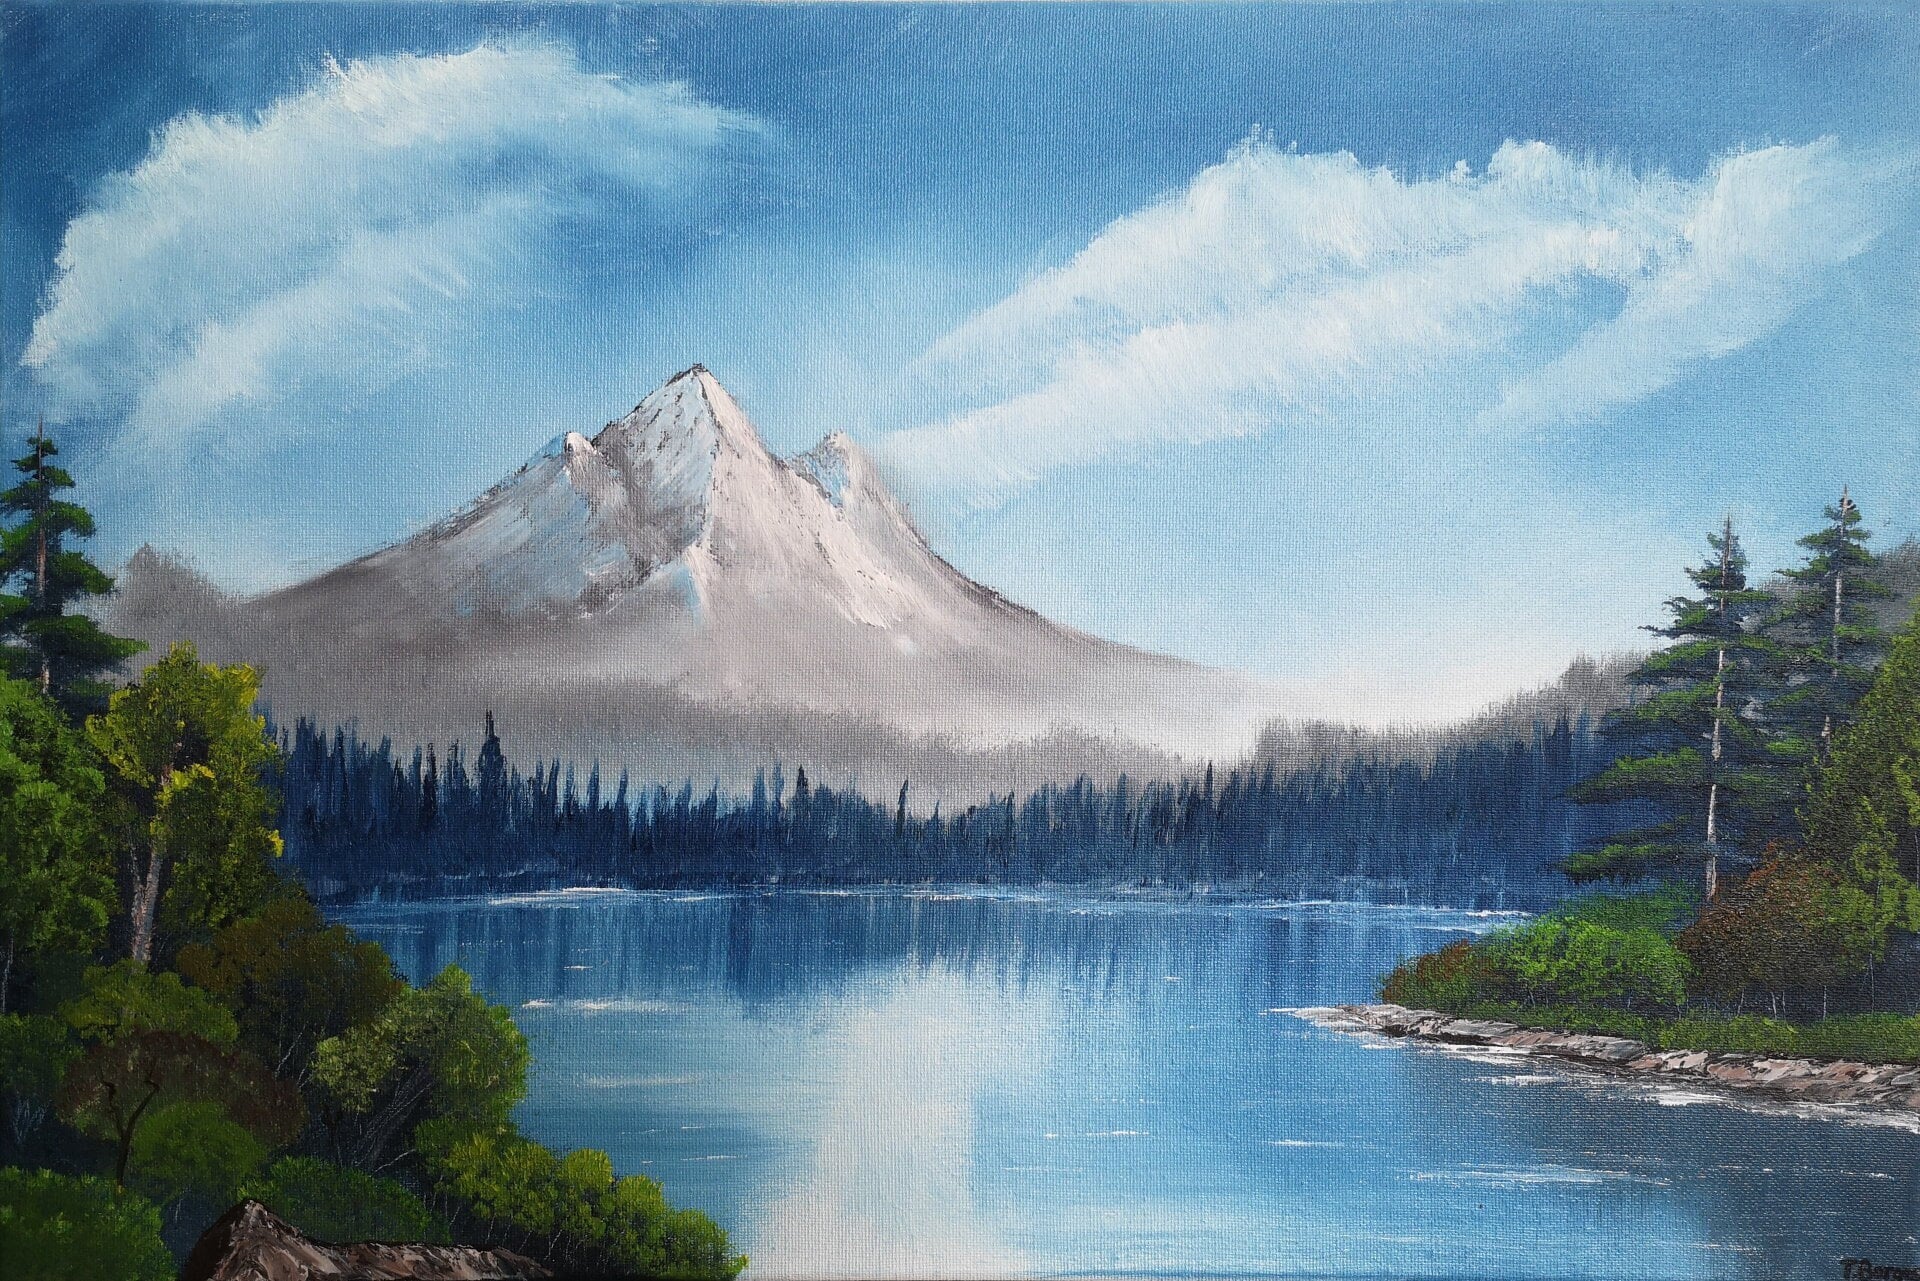 The first Bob Ross work from 'The Joy of Painting' is on sale